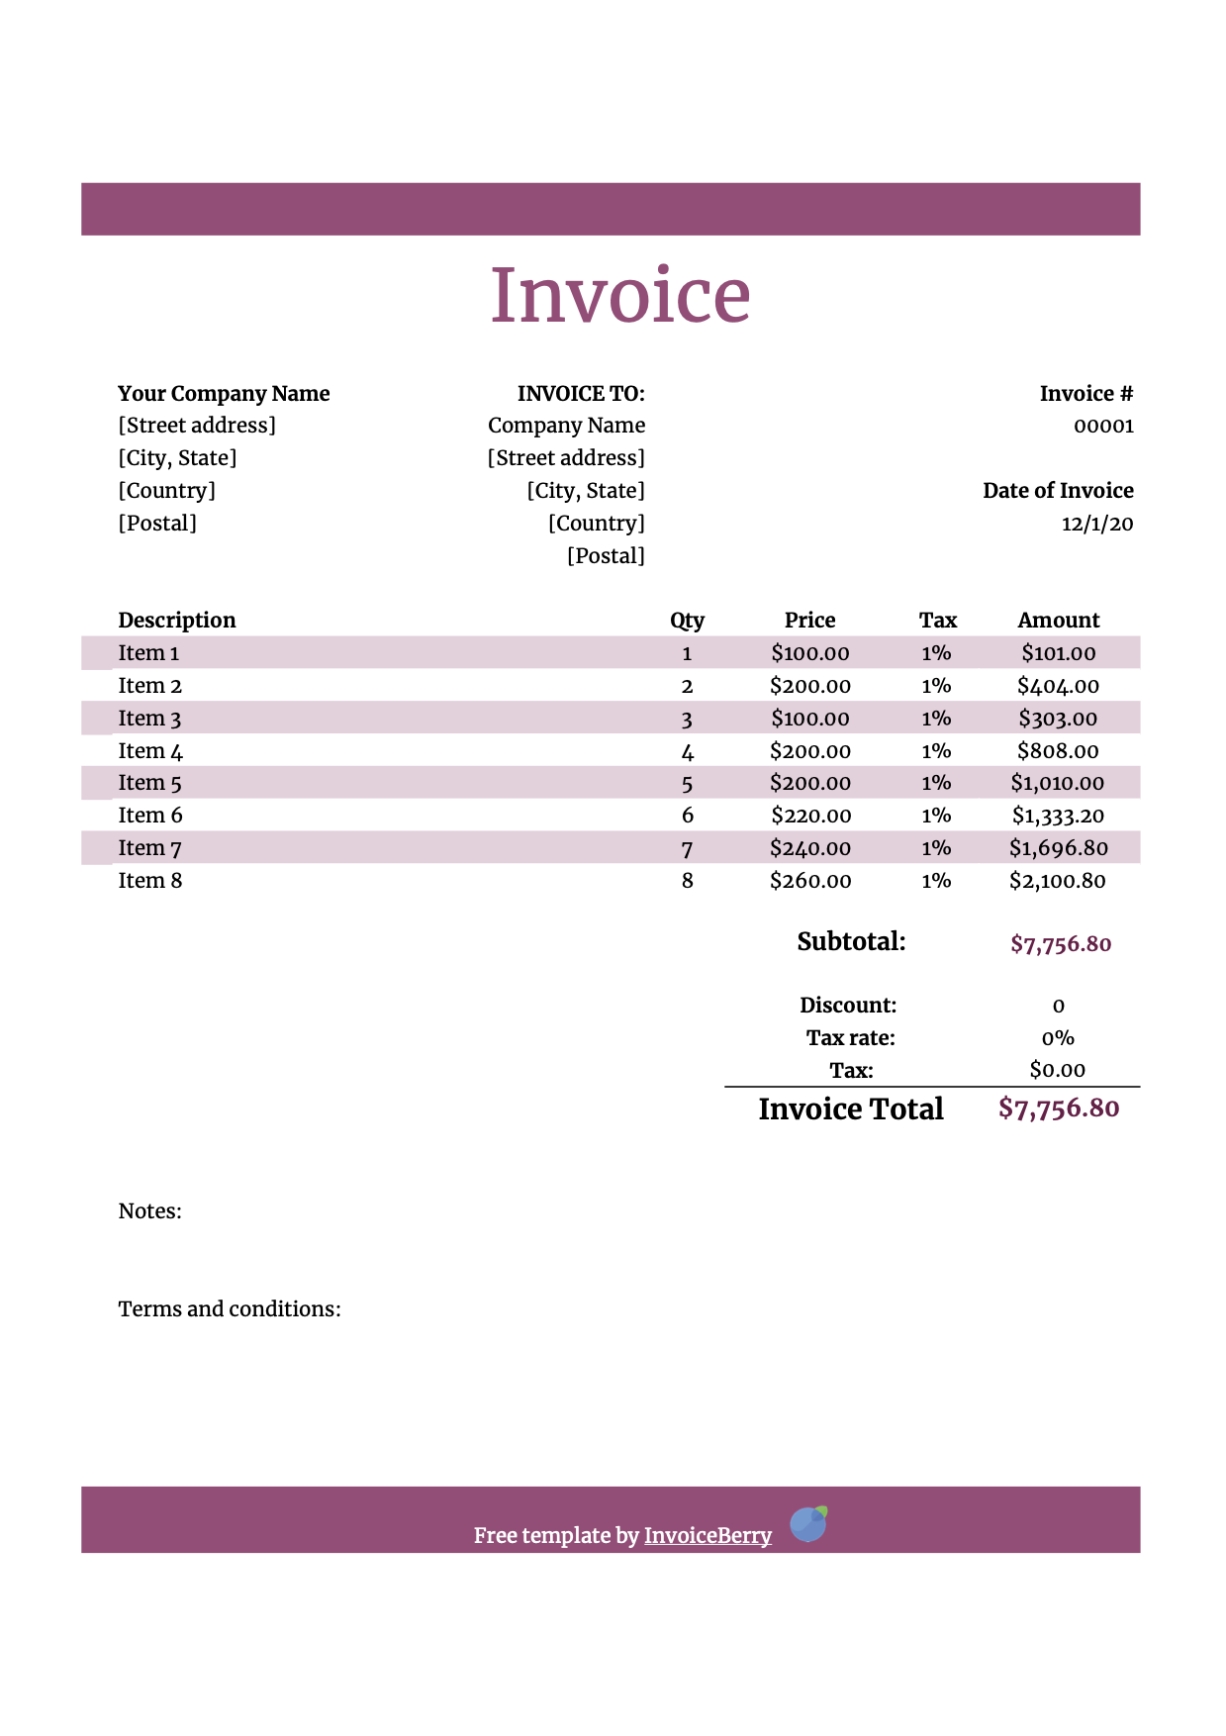 Free Google Drive Invoice Templates: Blank Docs & Sheets Invoices Within Image Of Invoice Template